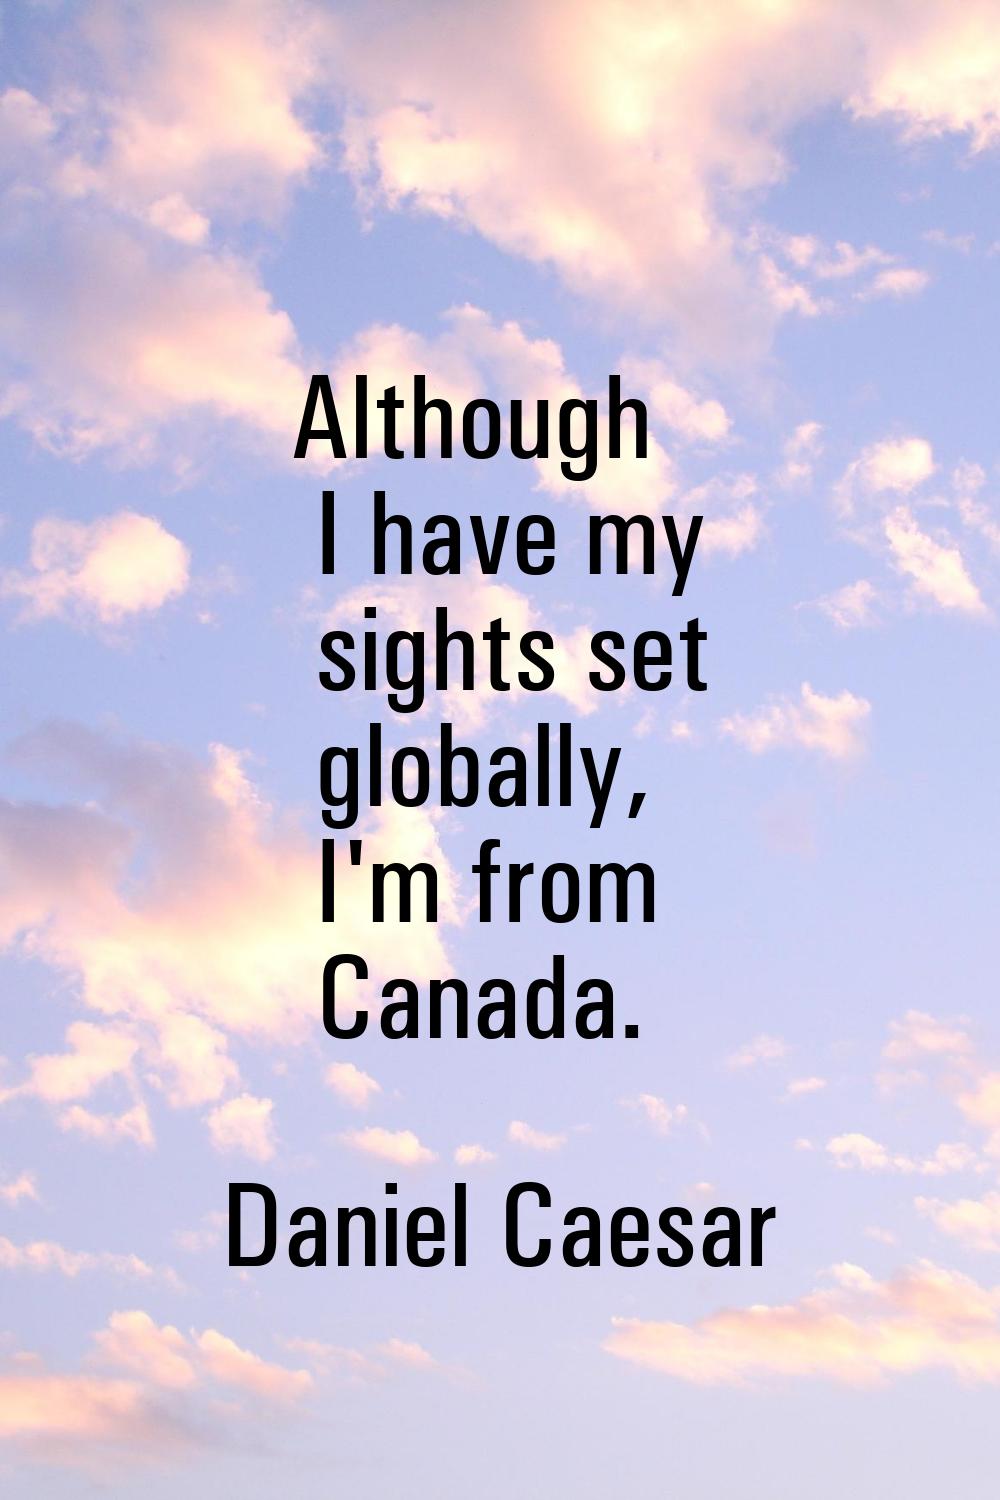 Although I have my sights set globally, I'm from Canada.